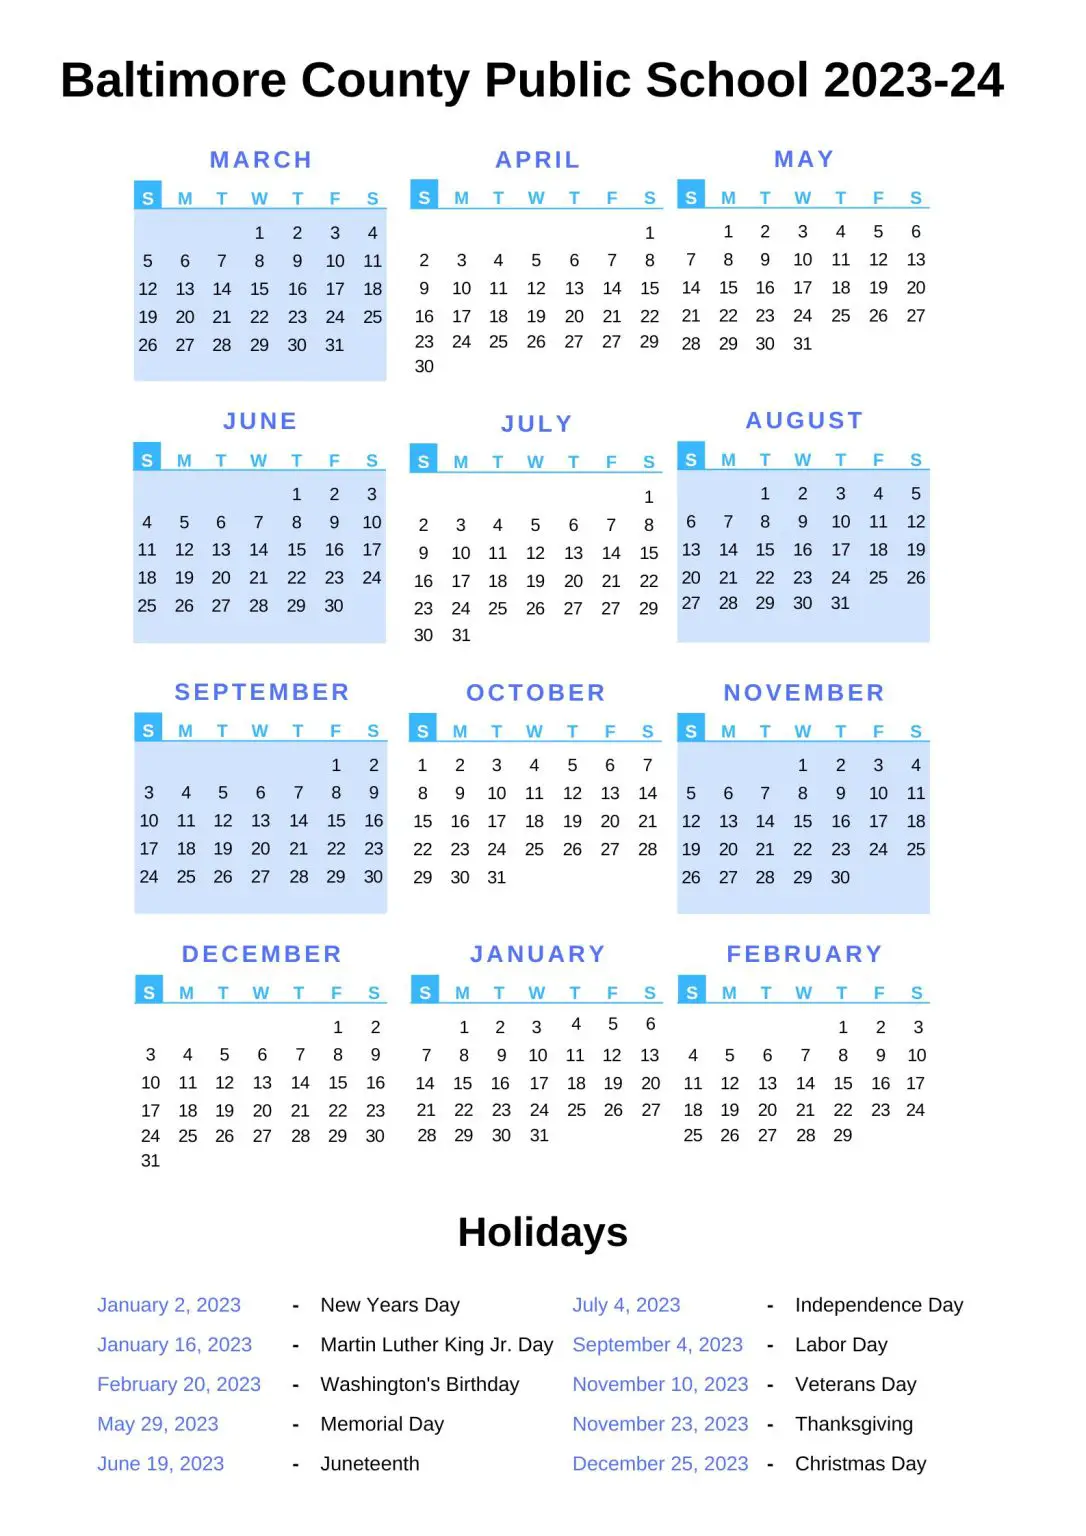 Baltimore County Public Schools Calendar 202324 With Holidays